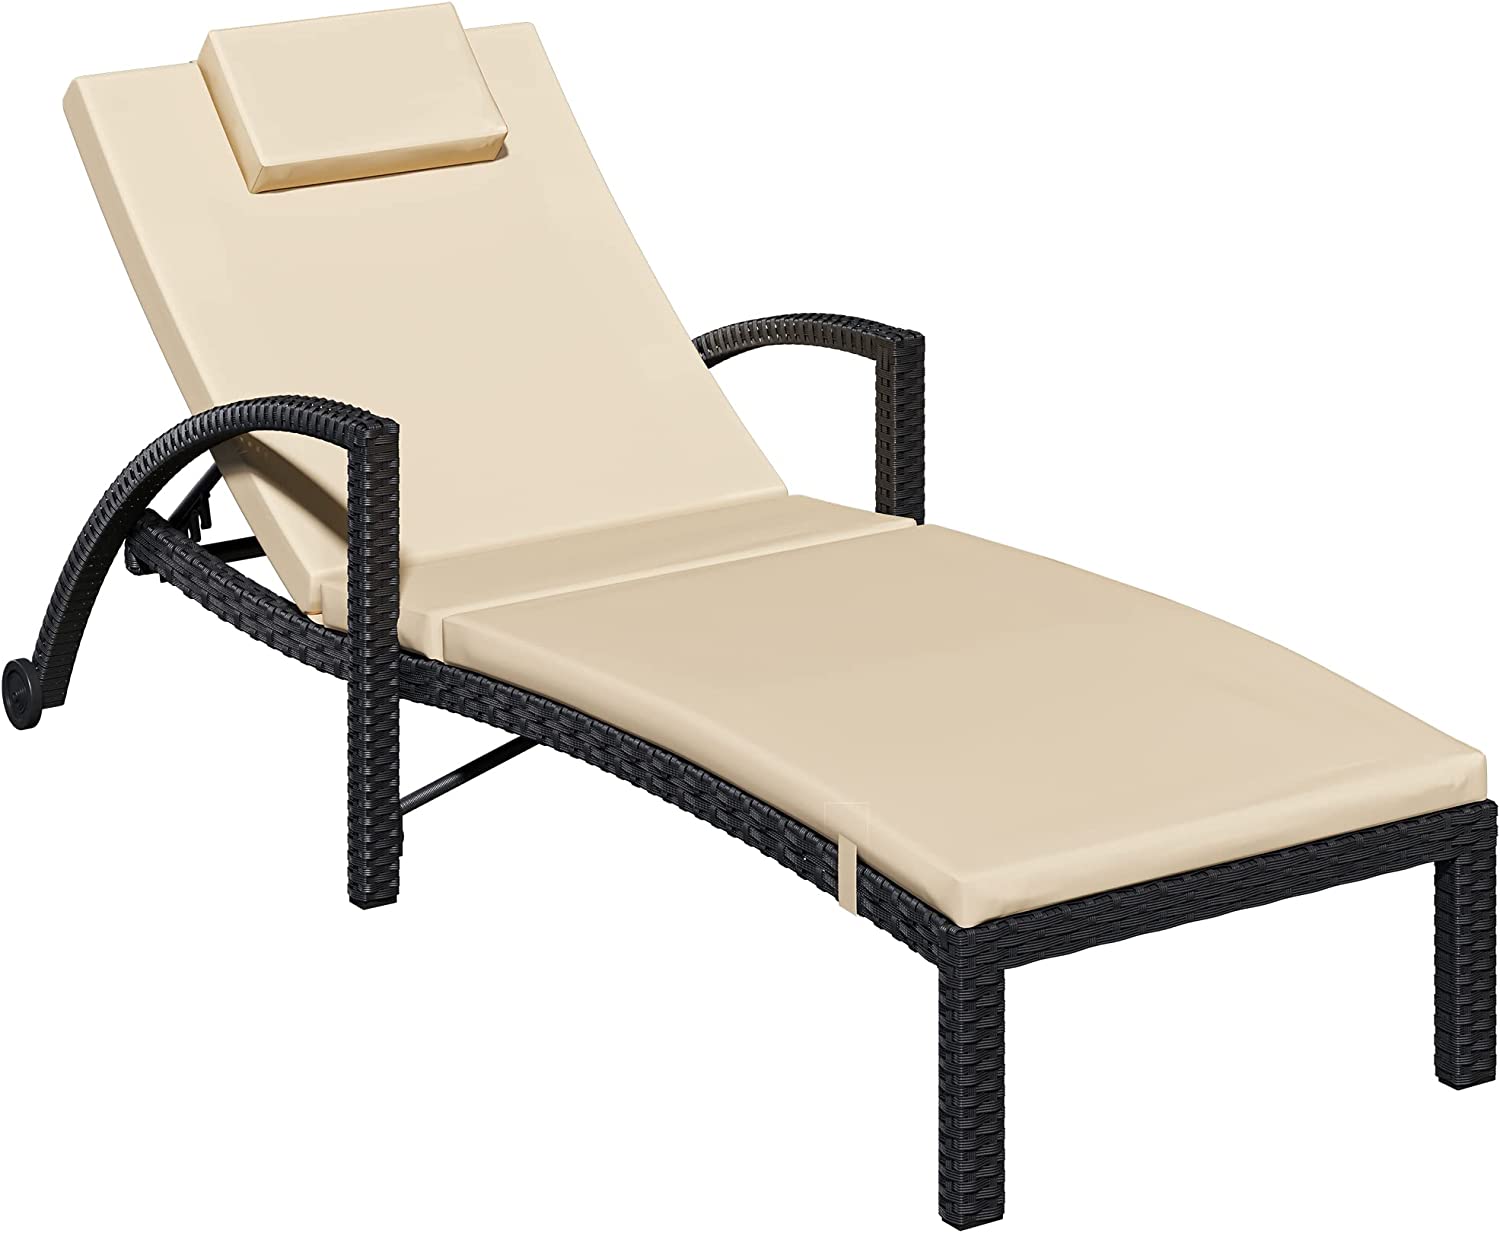 YITAHOME Outdoor Chaise Lounge Chairs, PE Rattan Wicker Patio Pool Loungers with Adjustable Backrest, Arm, Cushion, Pillow and Wheels for Poolside Backyard Porch Garden Beach (1, Black) - image 1 of 9